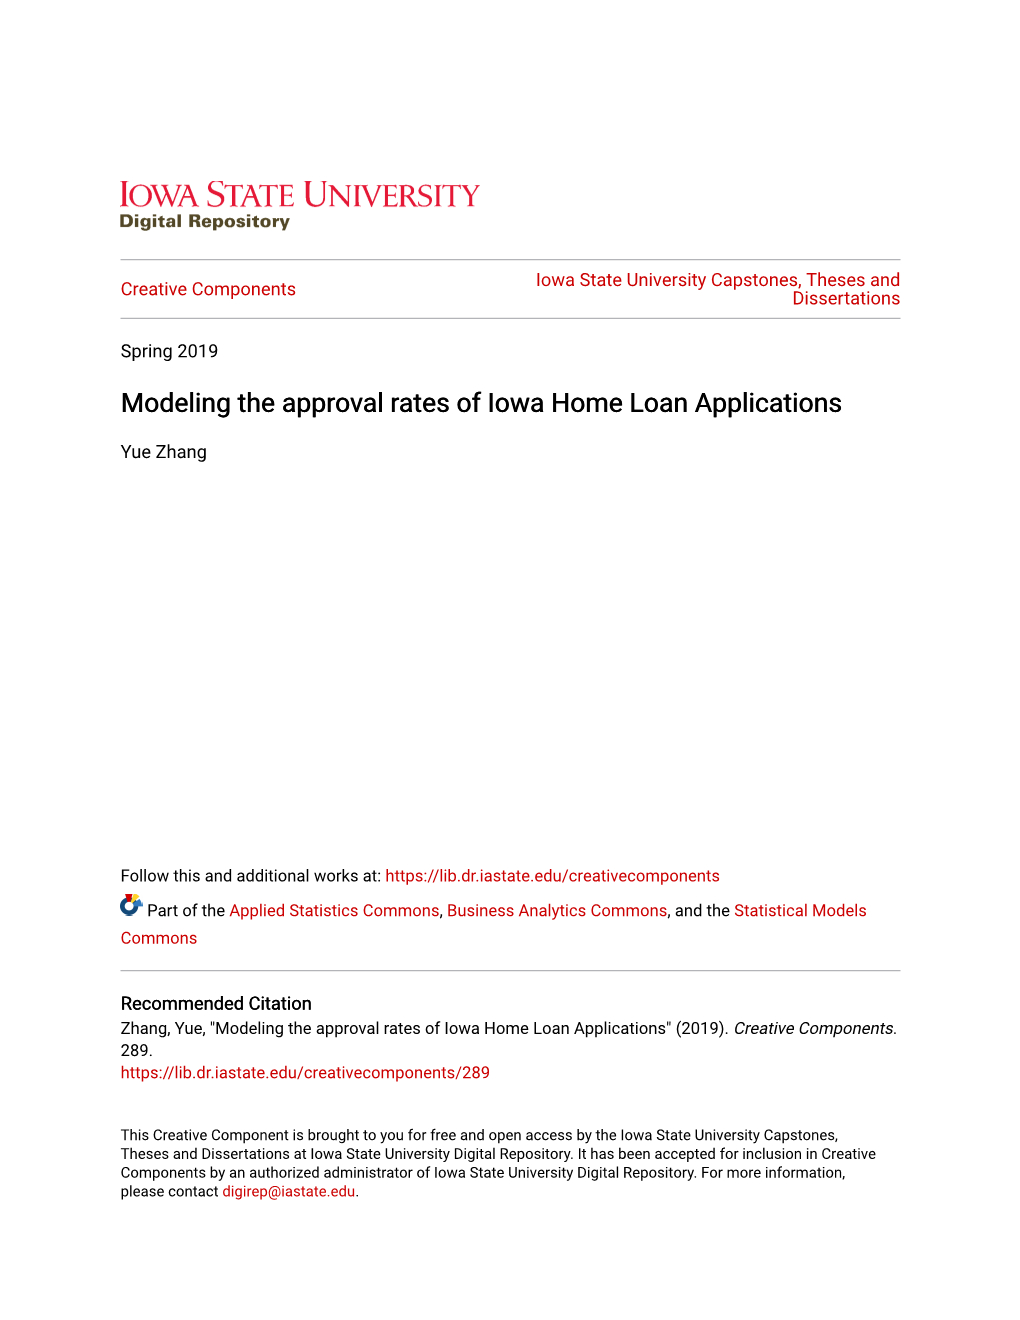 Modeling the Approval Rates of Iowa Home Loan Applications